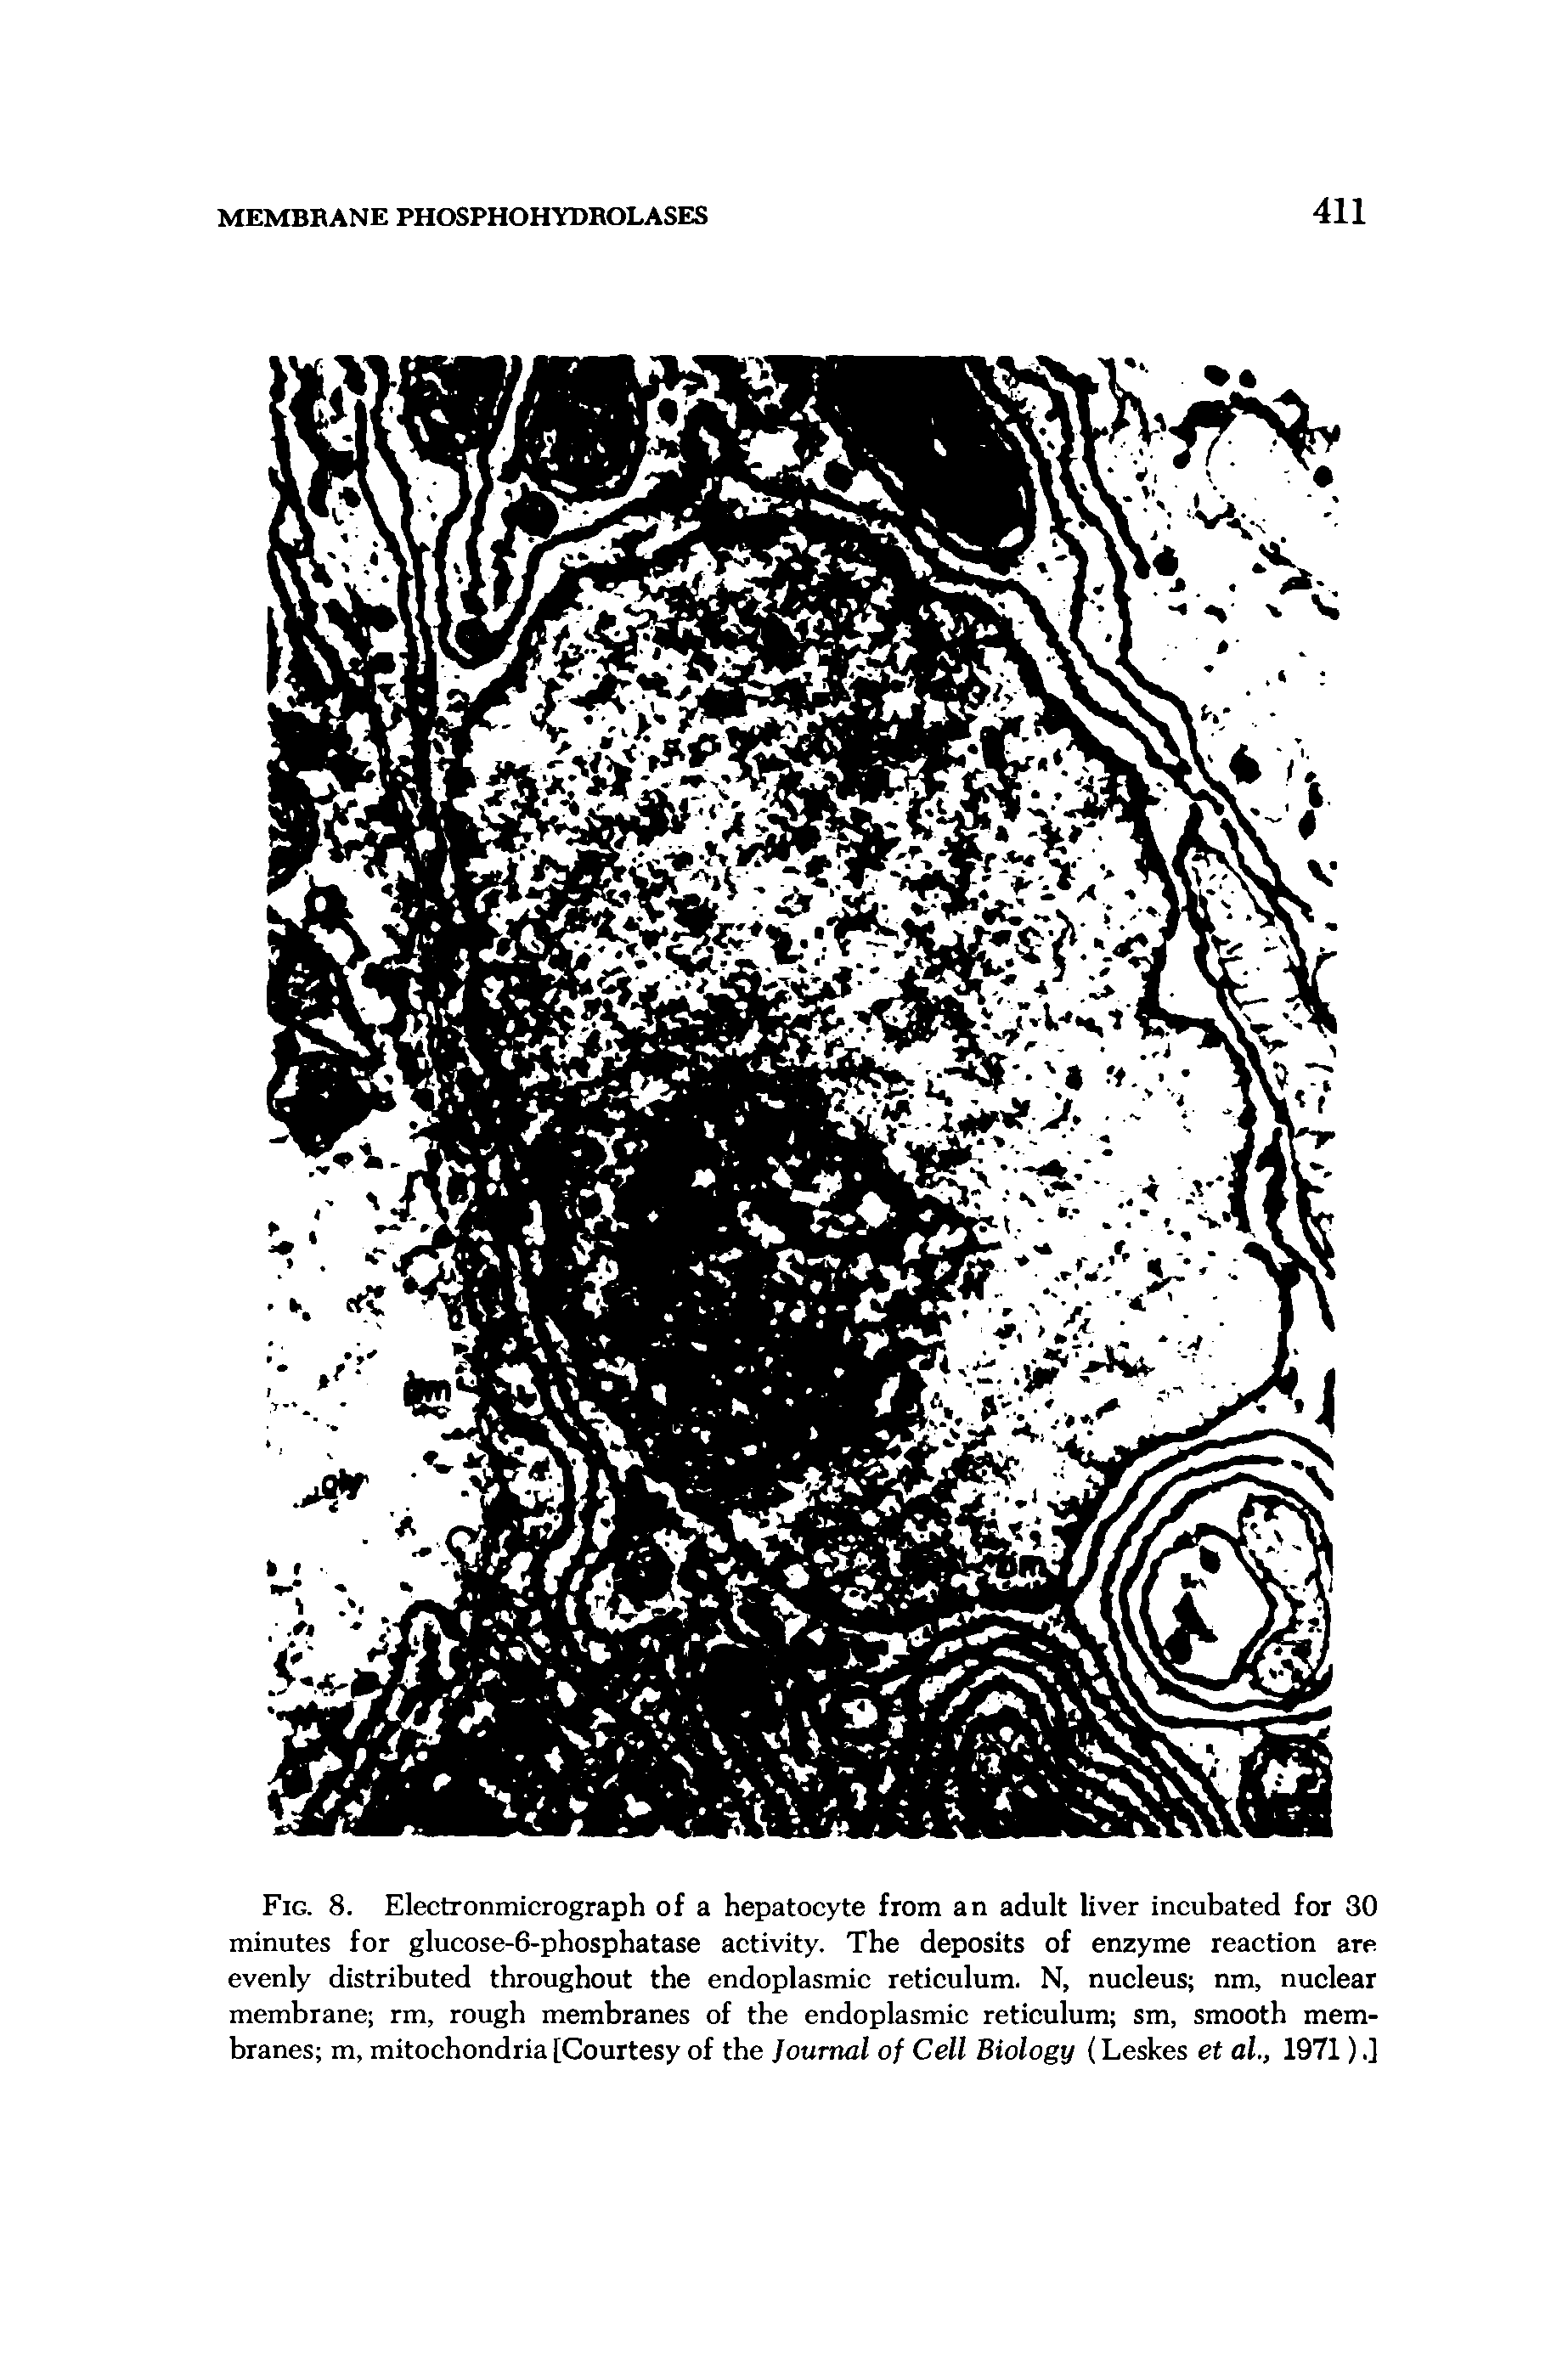 Fig. 8. Electronmicrograph of a hepatocyte from an adult liver incubated for 30 minutes for glucose-6-phosphatase activity. The deposits of enzyme reaction are evenly distributed throughout the endoplasmic reticulum. N, nucleus nm, nuclear membrane rm, rough membranes of the endoplasmic reticulum sm, smooth membranes m, mitochondria [Courtesy of the Journal of Cell Biology (Leskes et al., 1971).]...